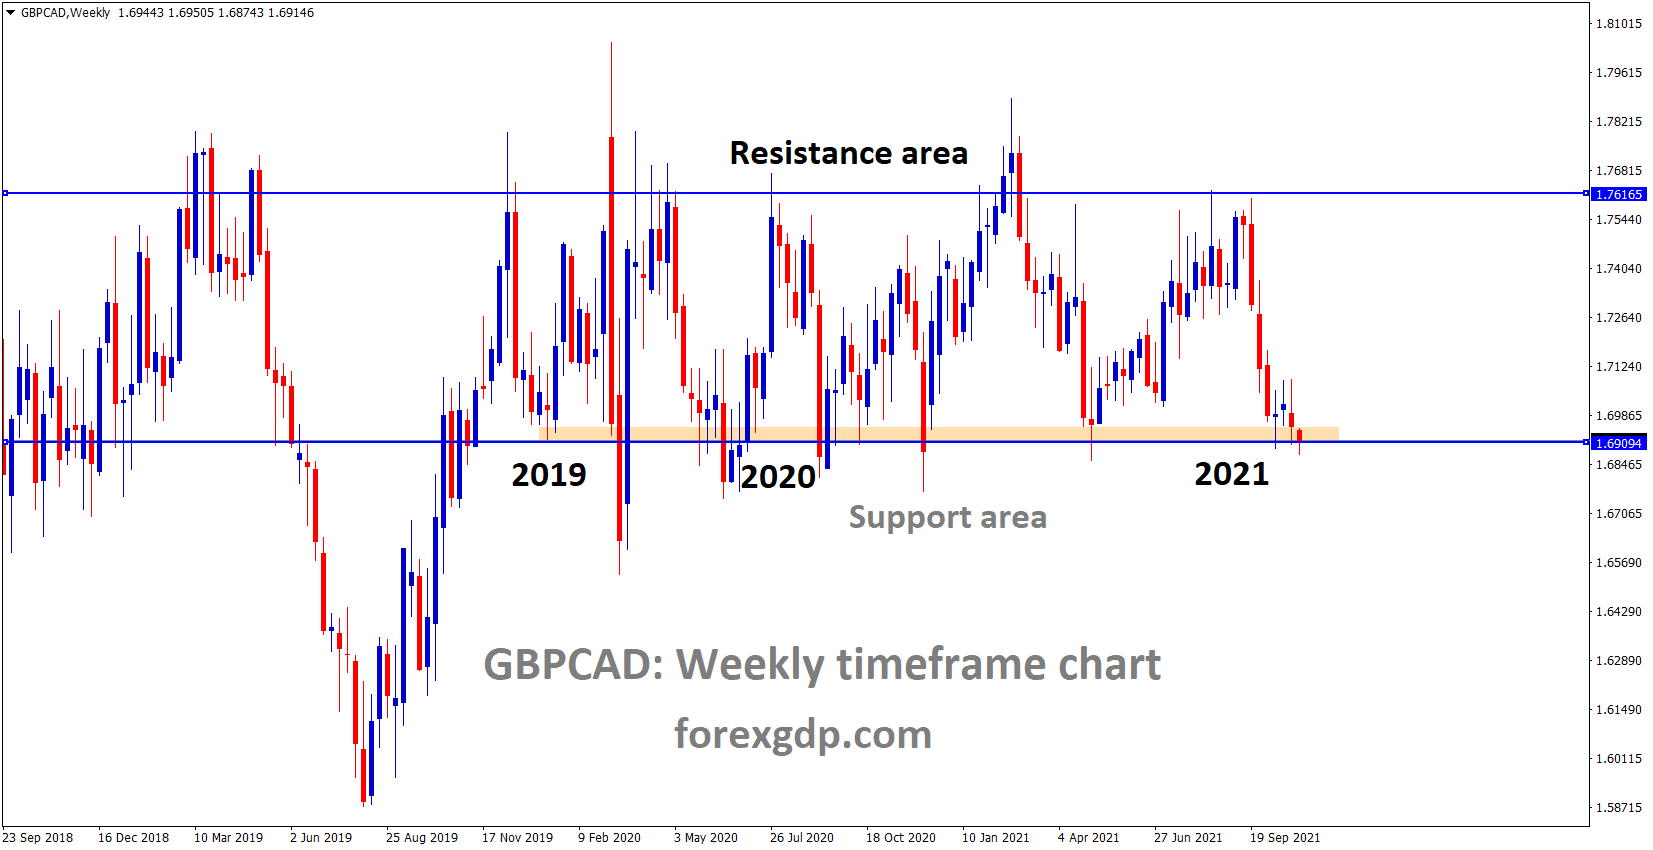 GBPCAD is moving in the sideways market in the last 2 years